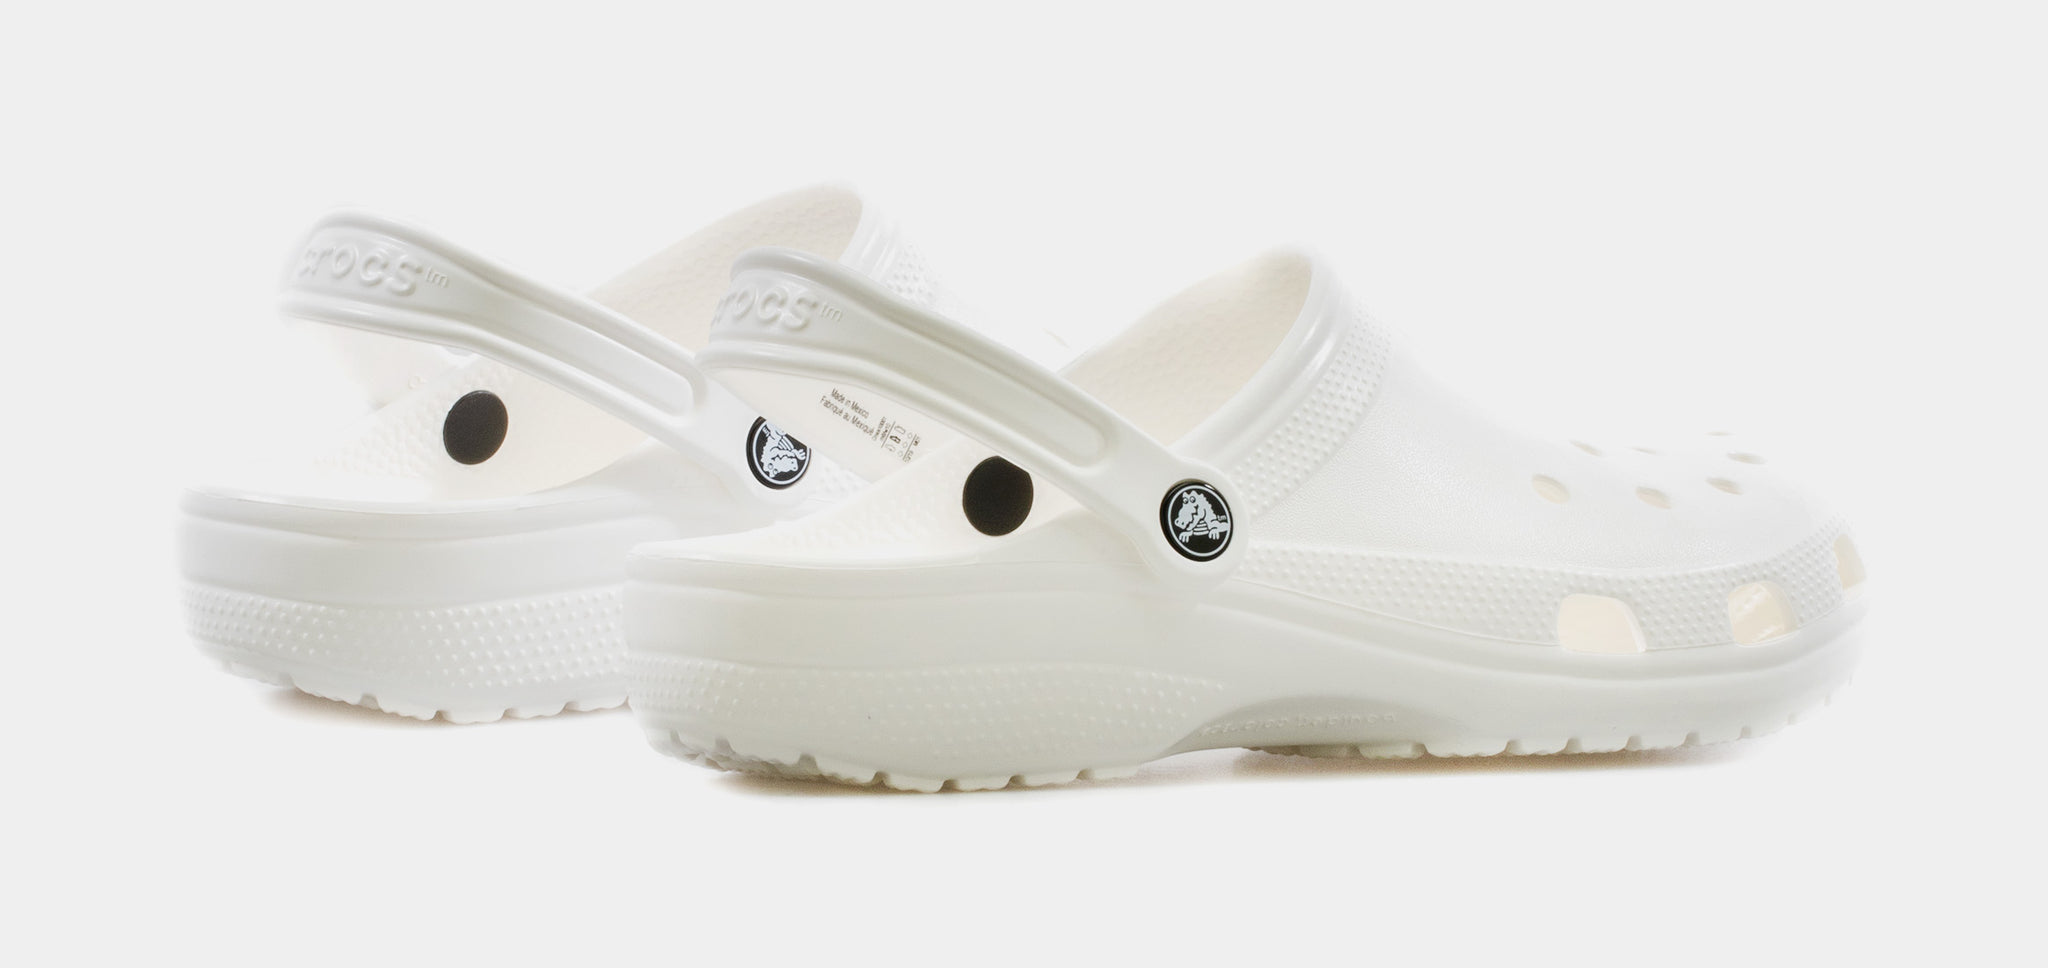 Buy Mcm X Crocs Clog Sandals - White At 40% Off | Editorialist